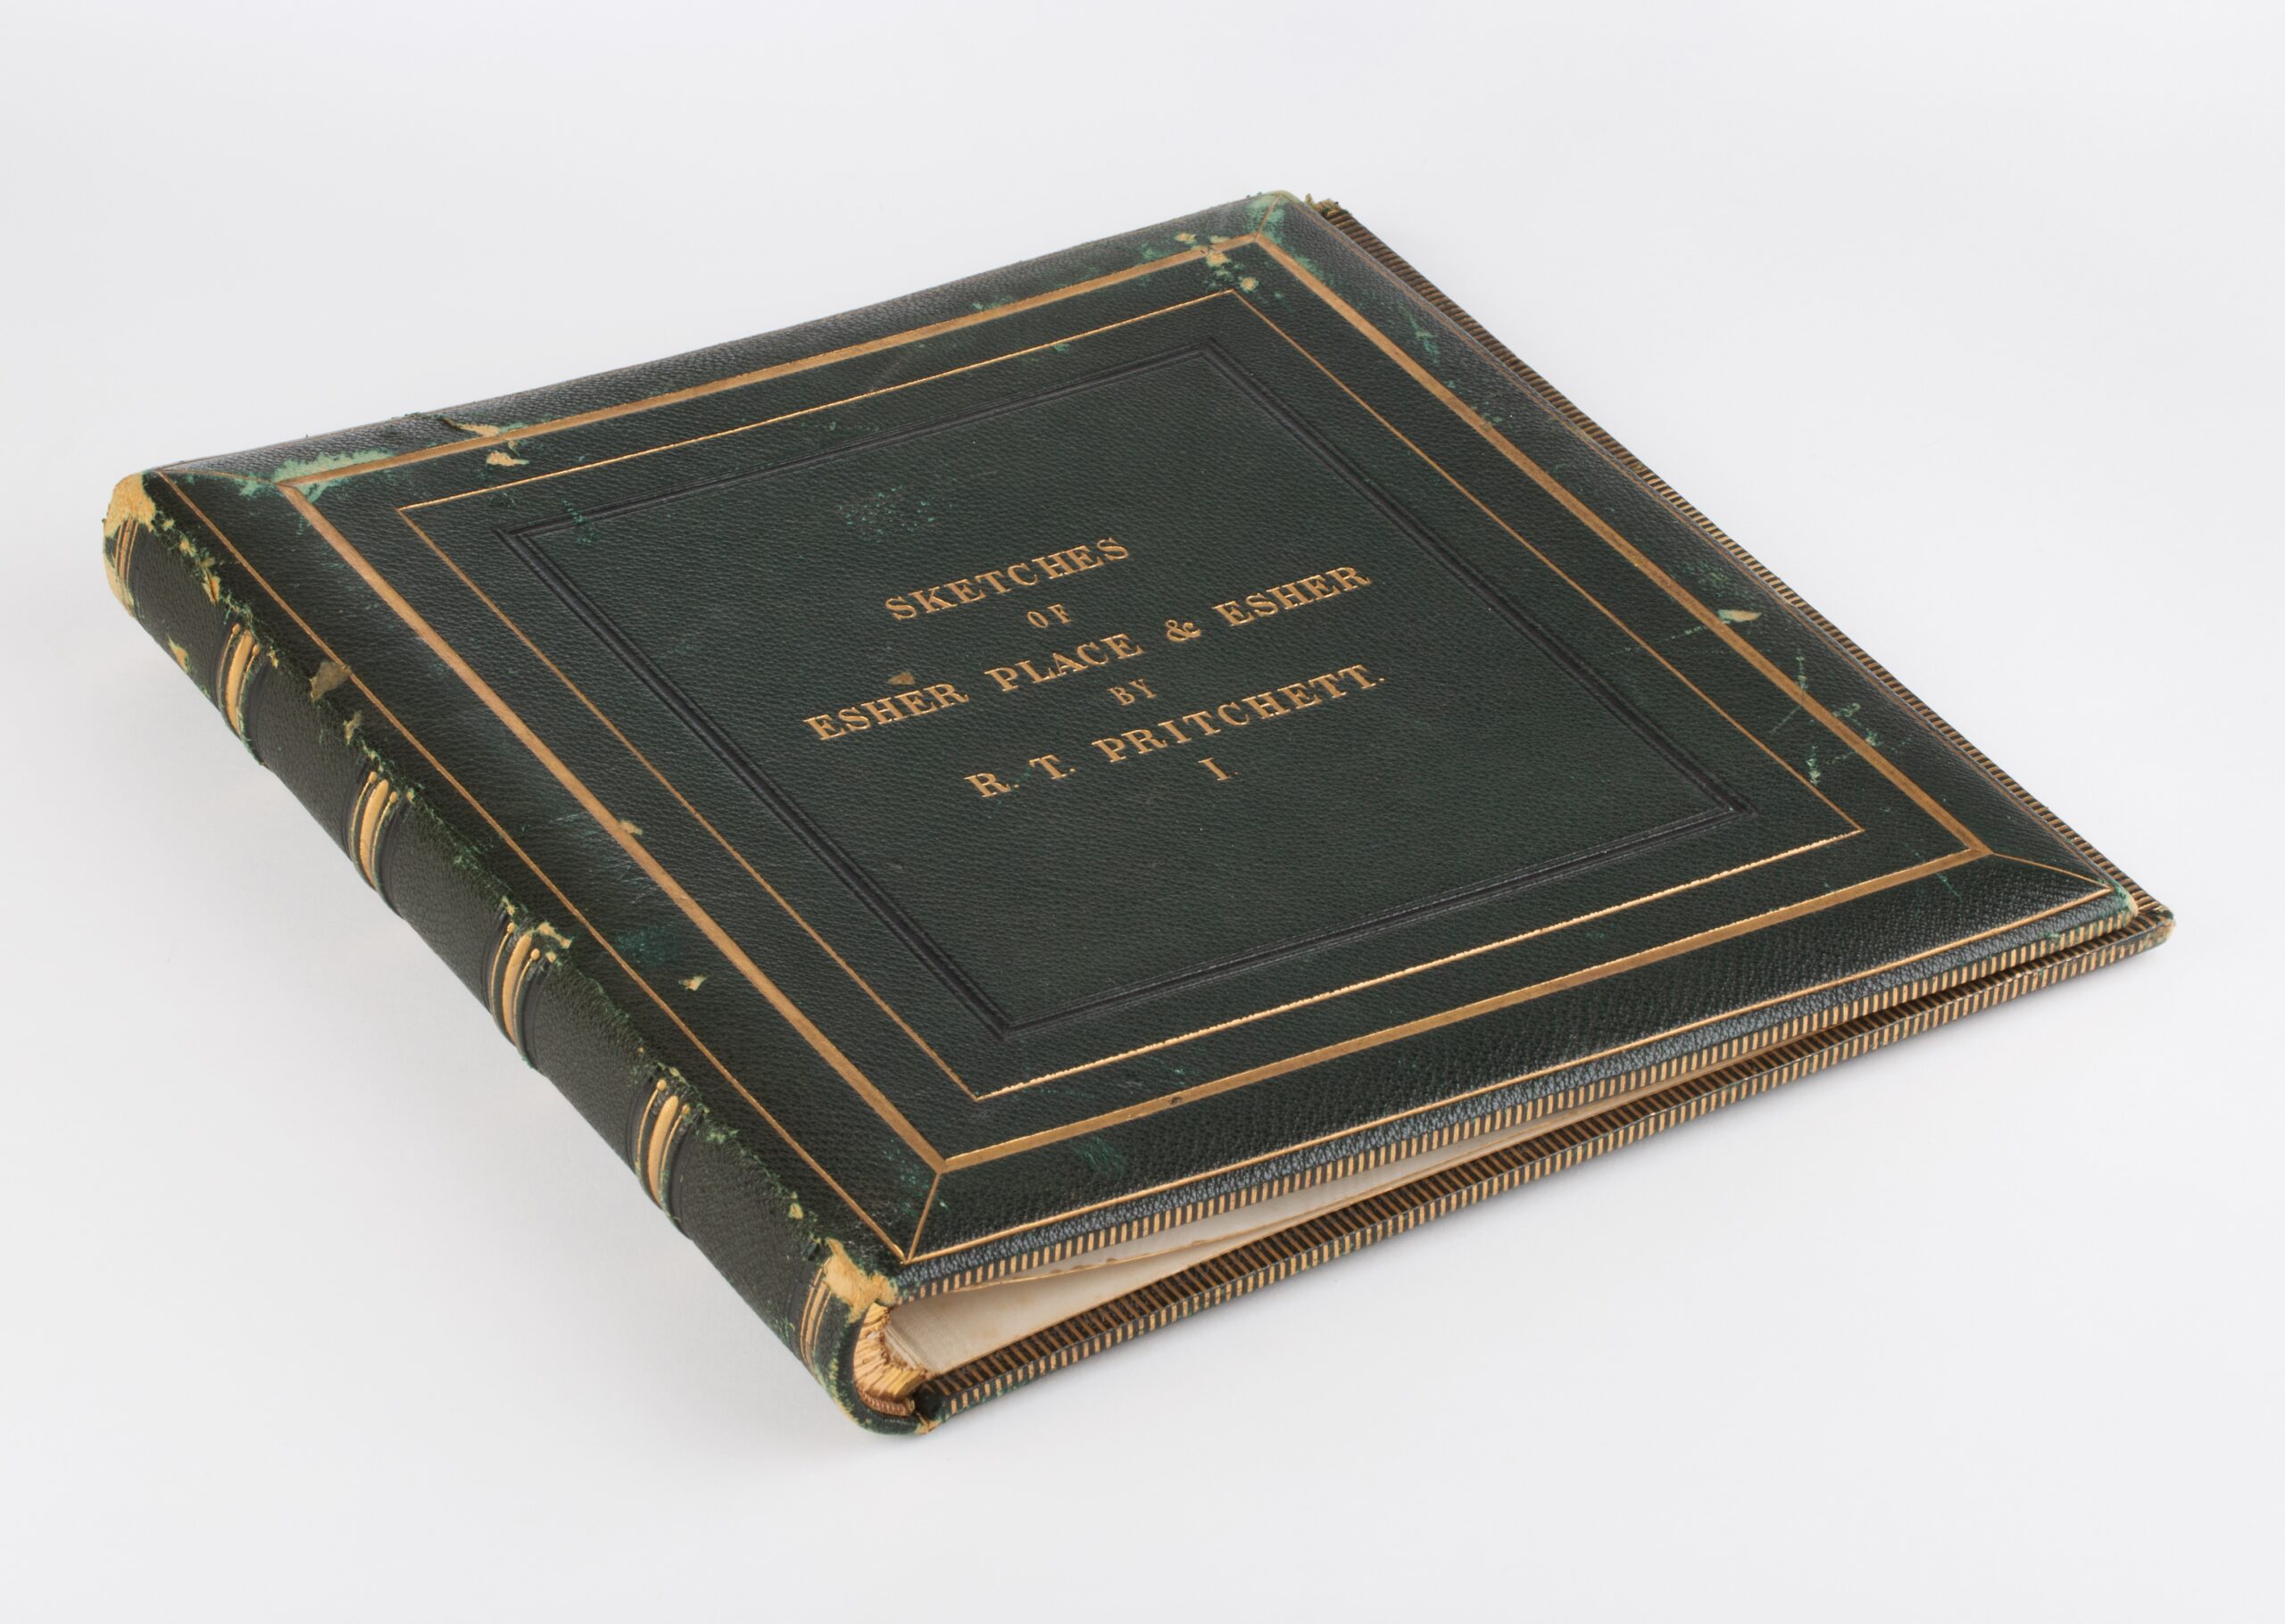 Sketches of Esher Place & Esher by R.T Pritchett, I’, bound in green leather.